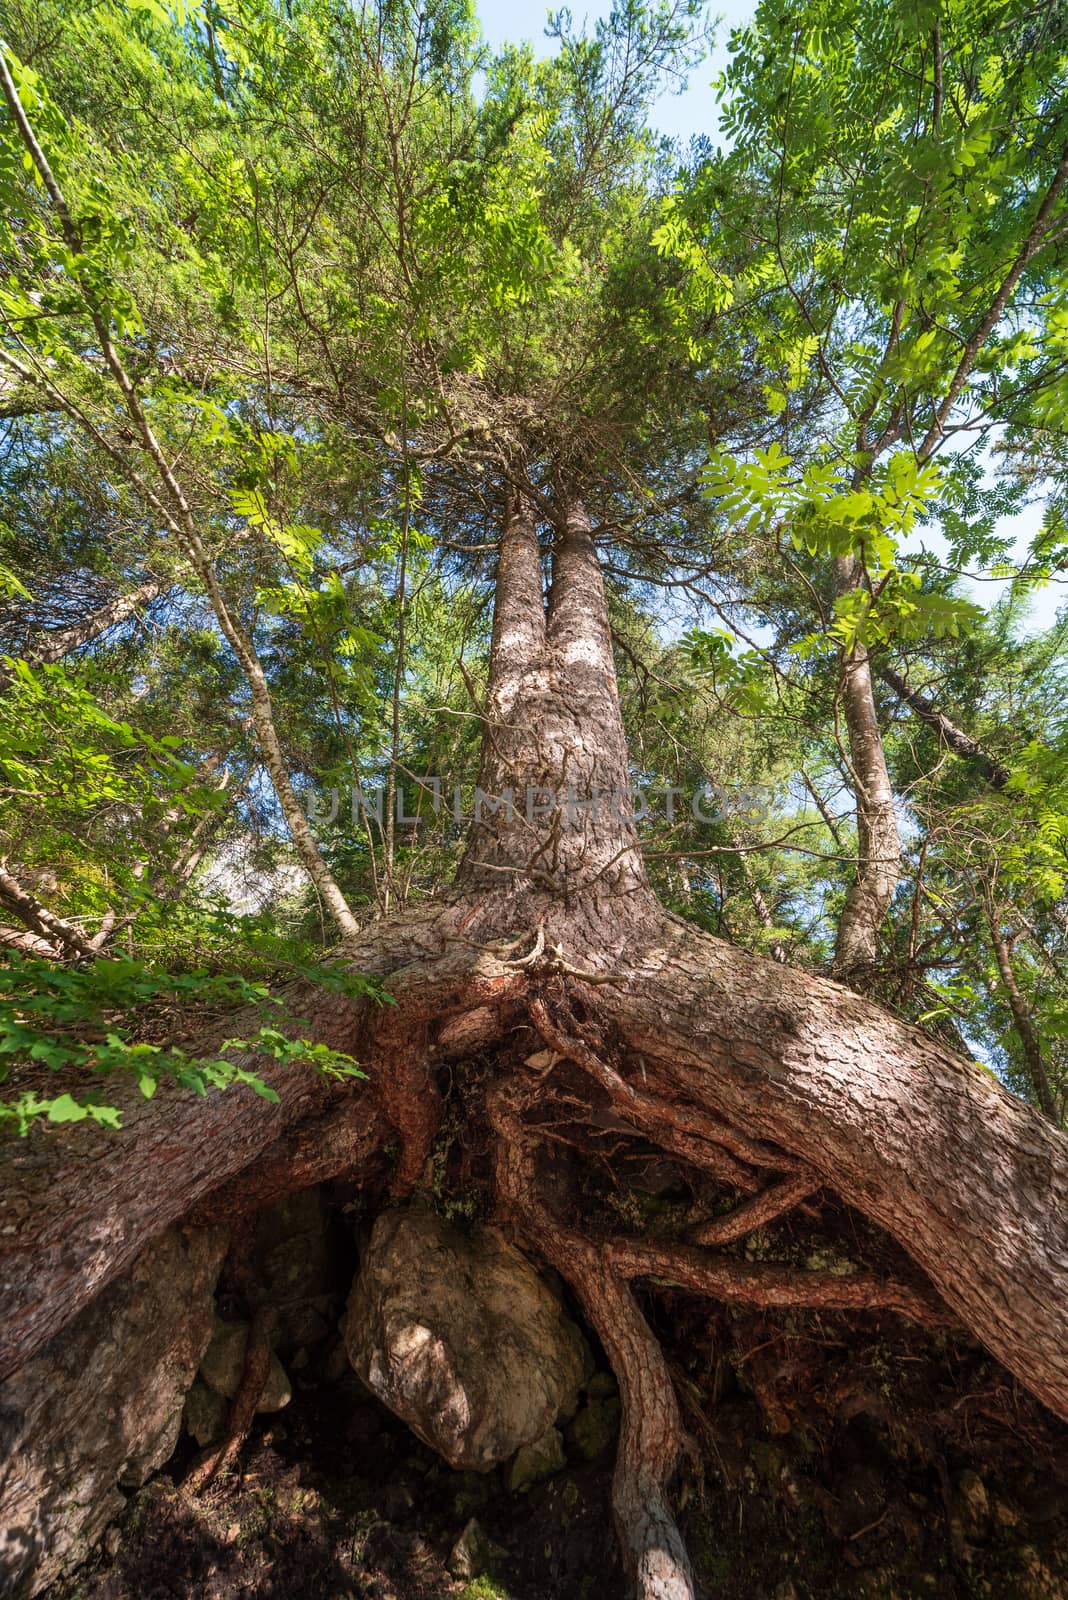 Bottom view of a large tree and its huge roots that come out of the ground, naturalistic image